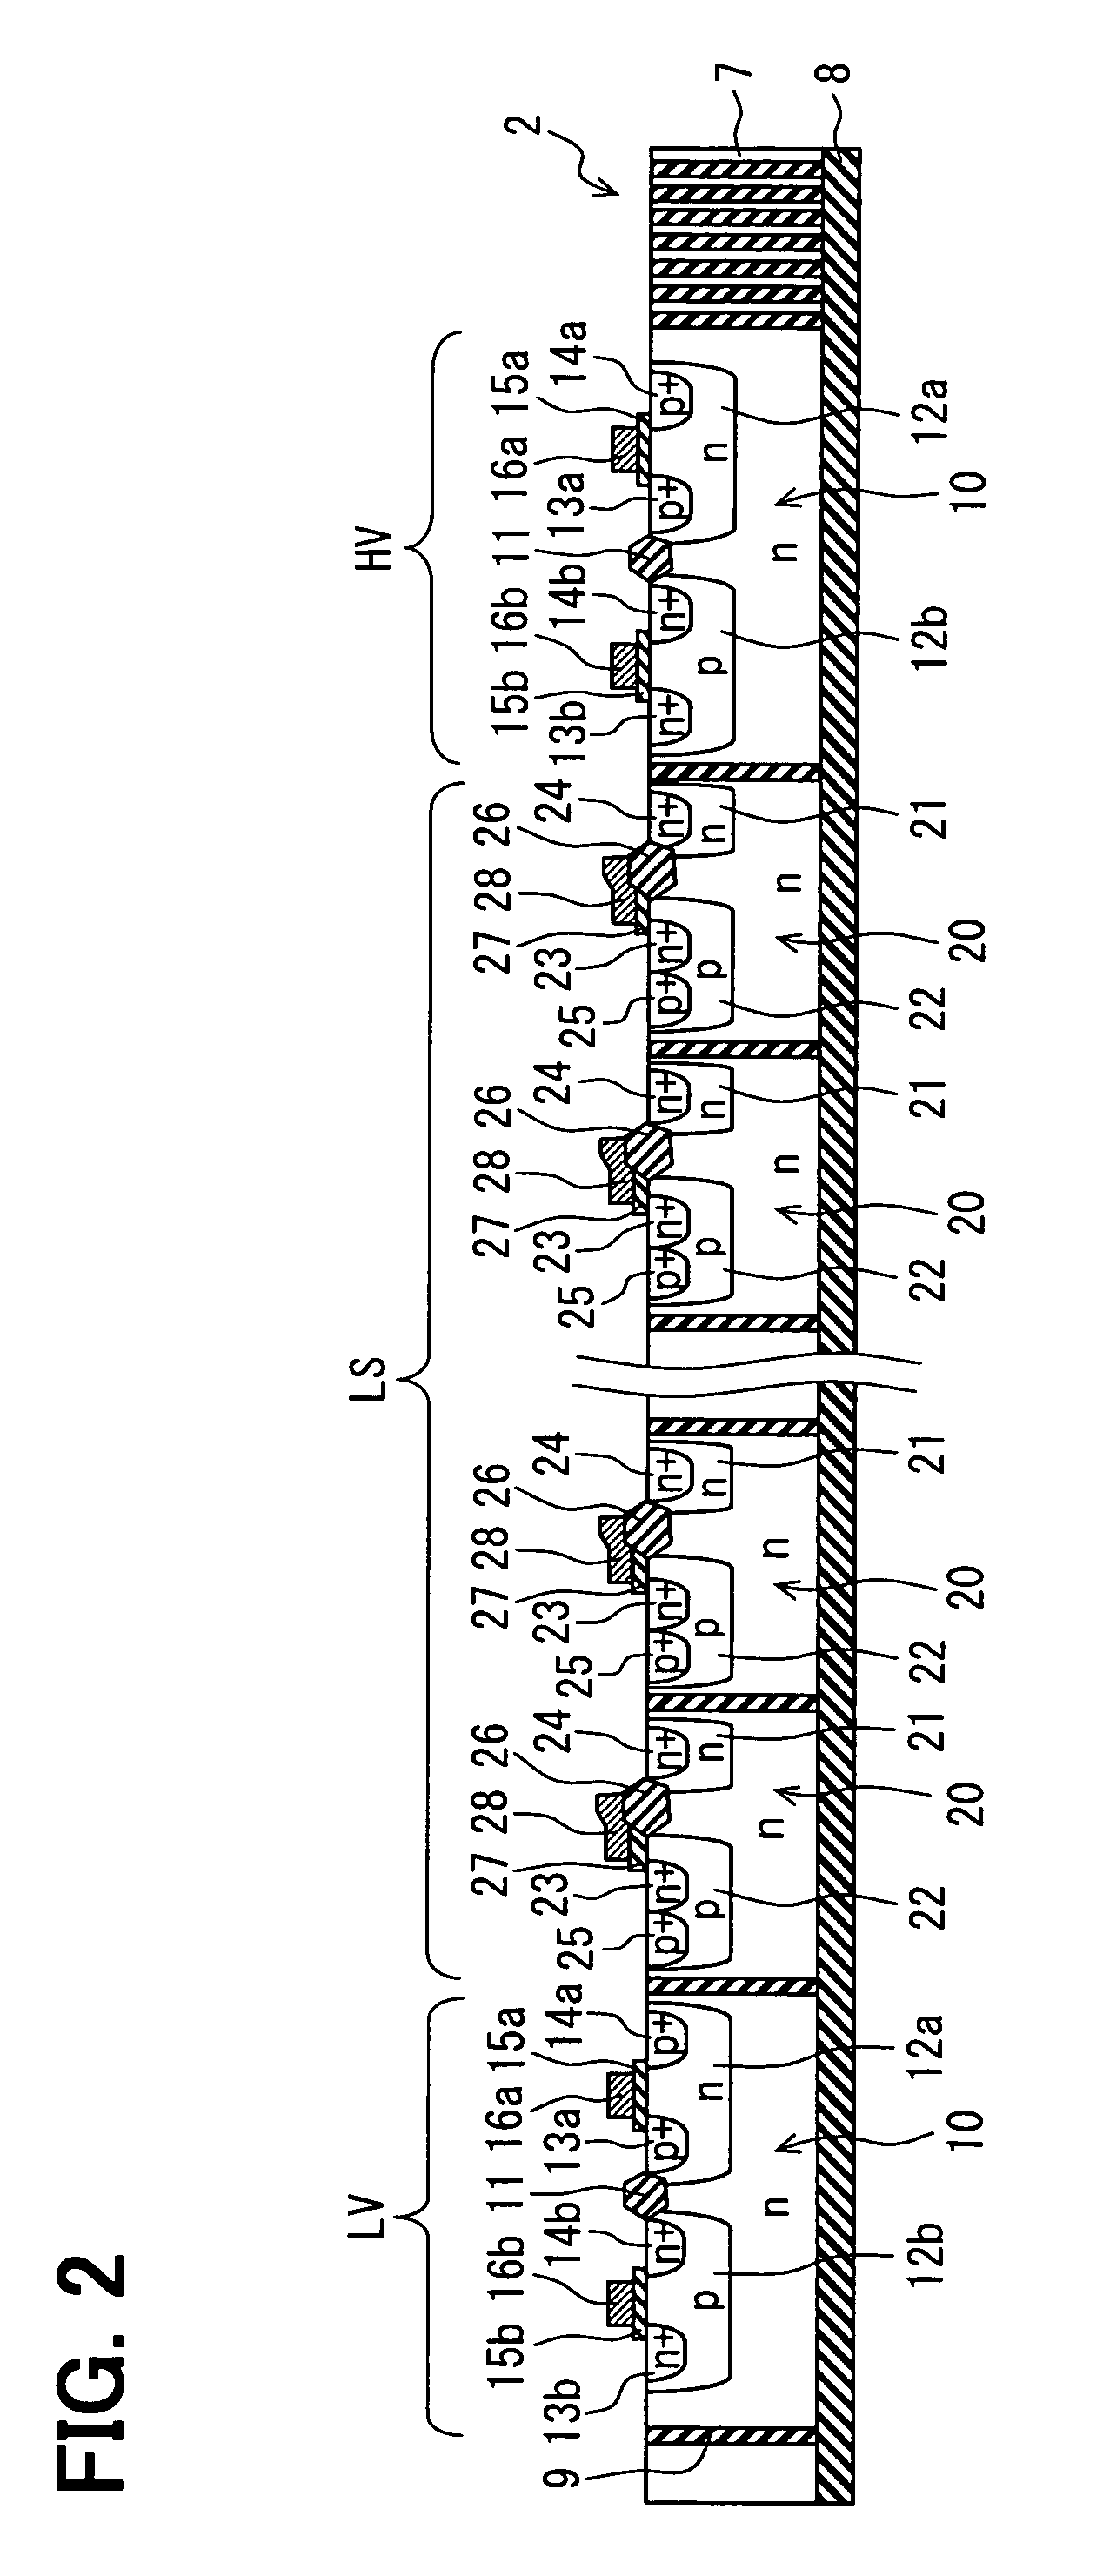 Semiconductor device, method for manufacturing the same, and multilayer substrate having the same